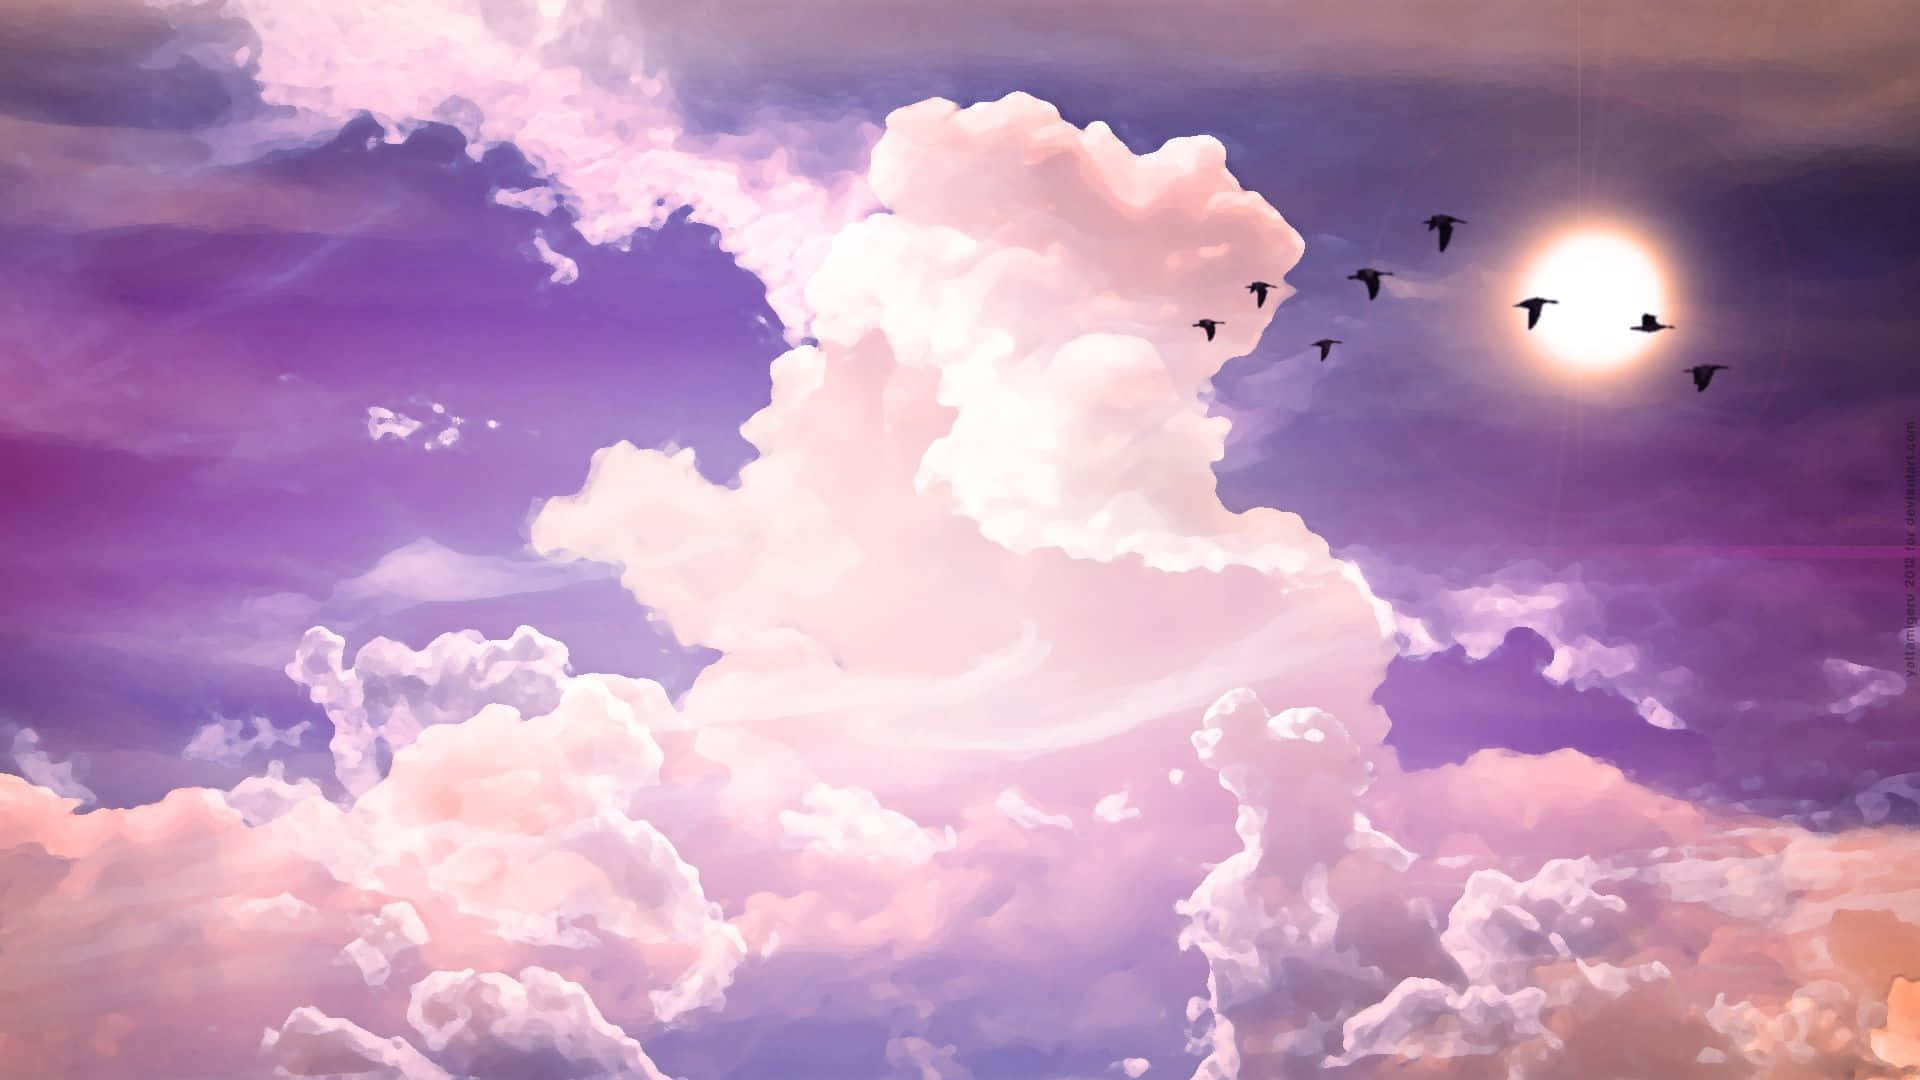 "Take a look up at the clouds dancing in the sky and take a break from the stresses of life"